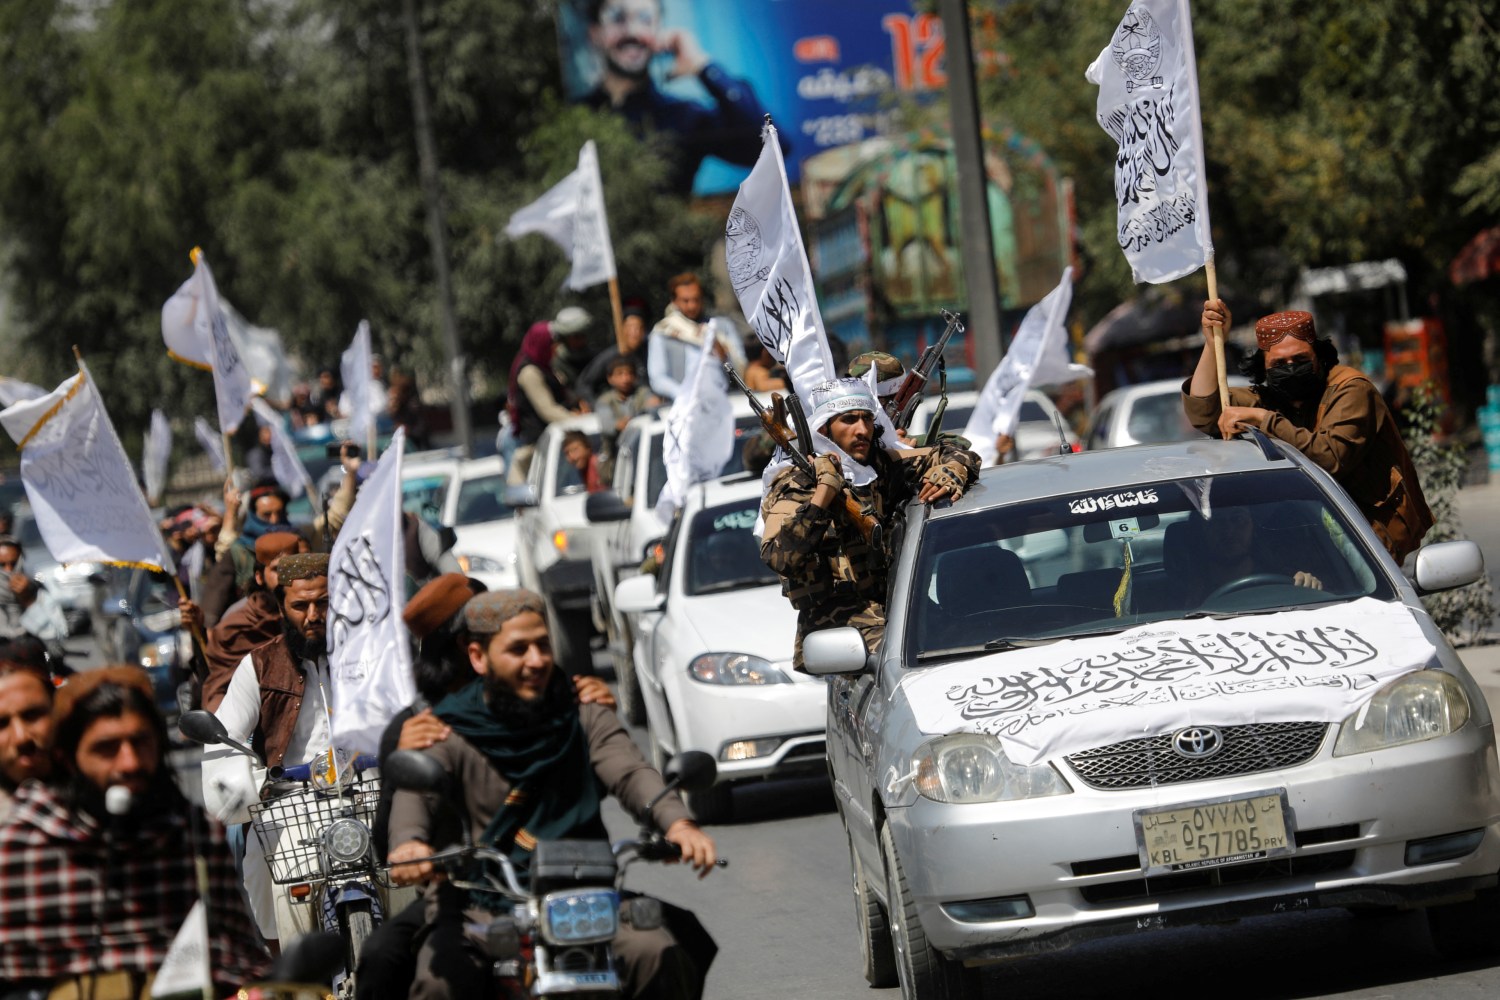 Taliban members drive in a convoy to celebrate the first anniversary of the withdrawal of U.S. troops from Afghanistan, along a street in Kabul, Afghanistan, August 31, 2022. REUTERS/Ali Khara